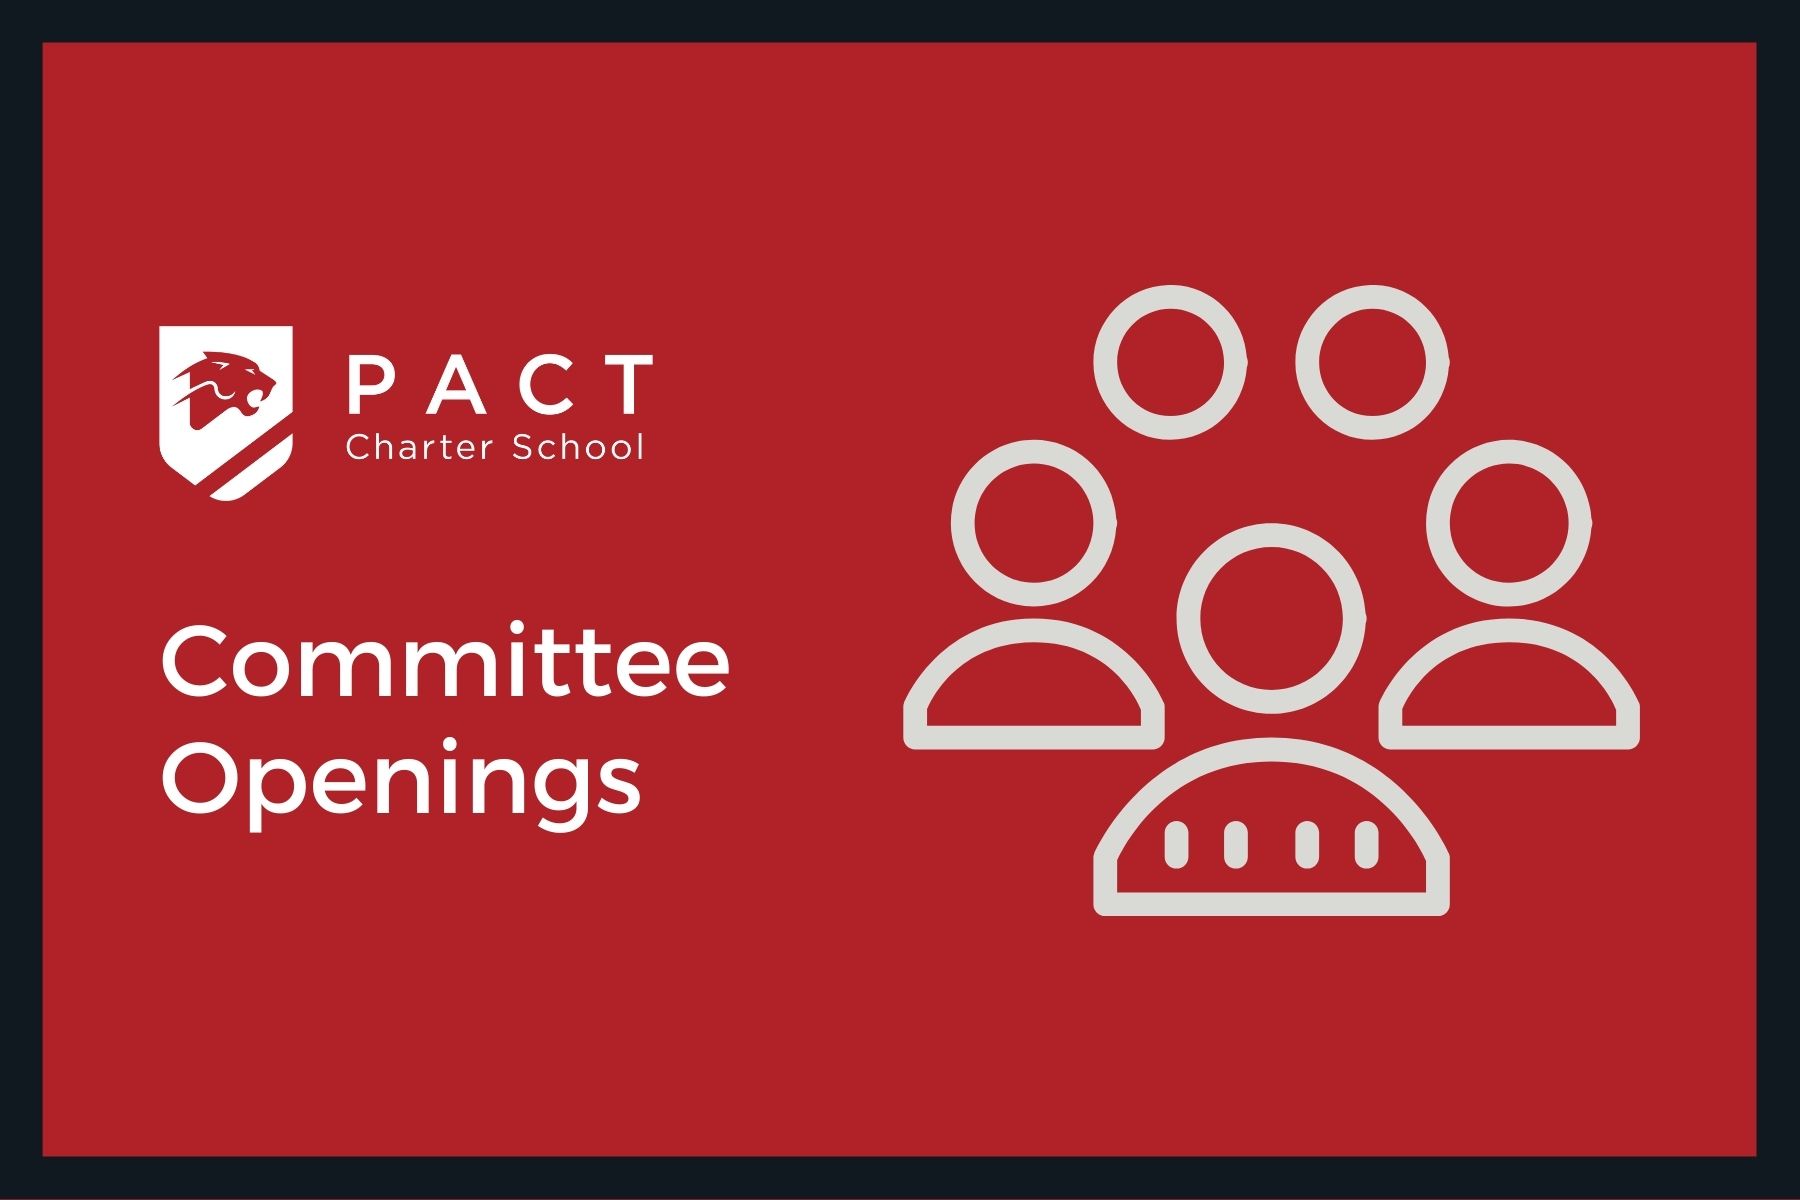 PACT Committee Openings